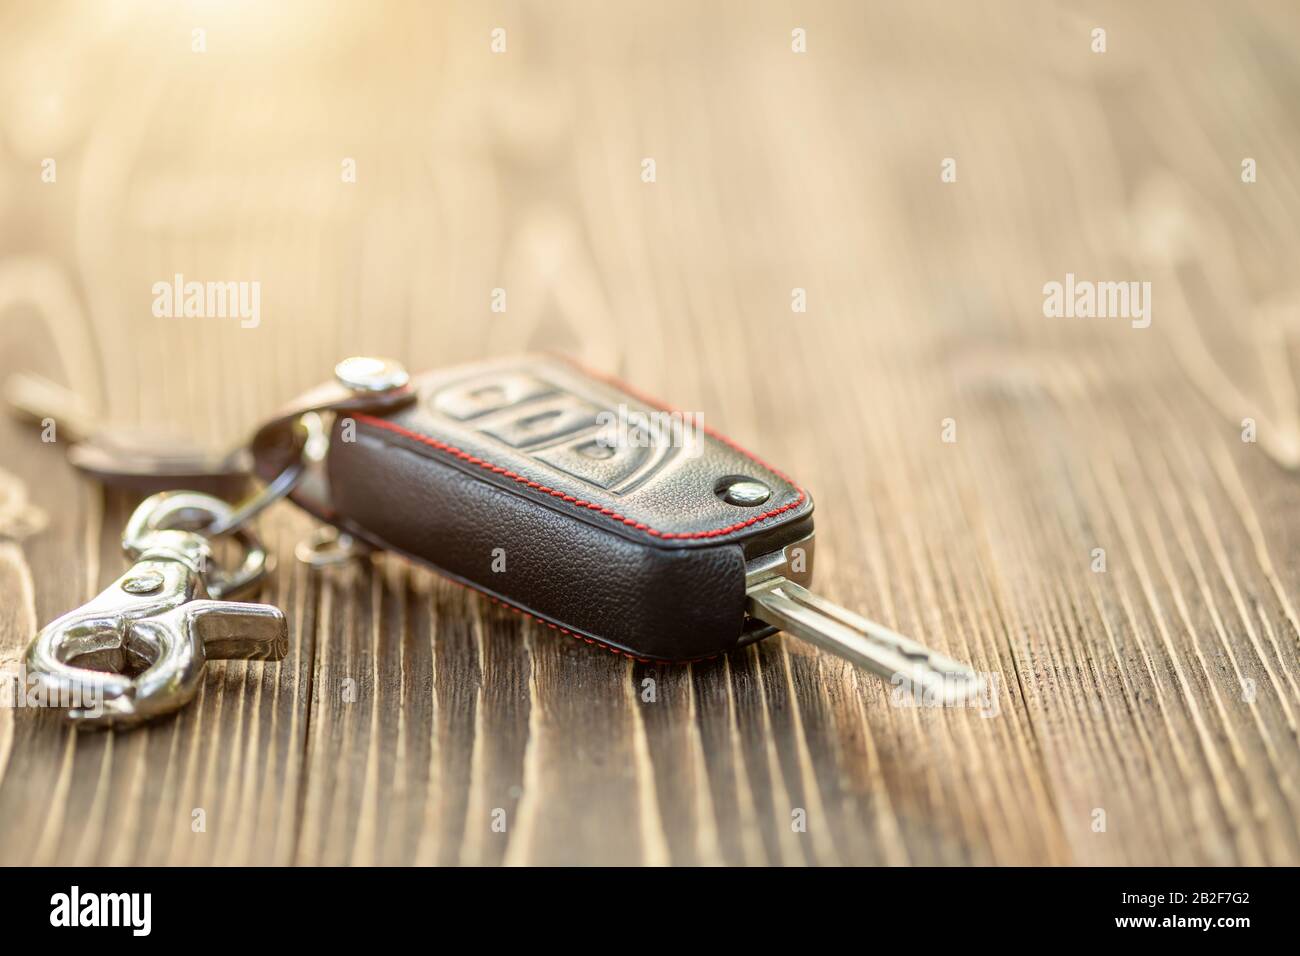 Close up new car keys with black leather cover on wooden table Stock Photo